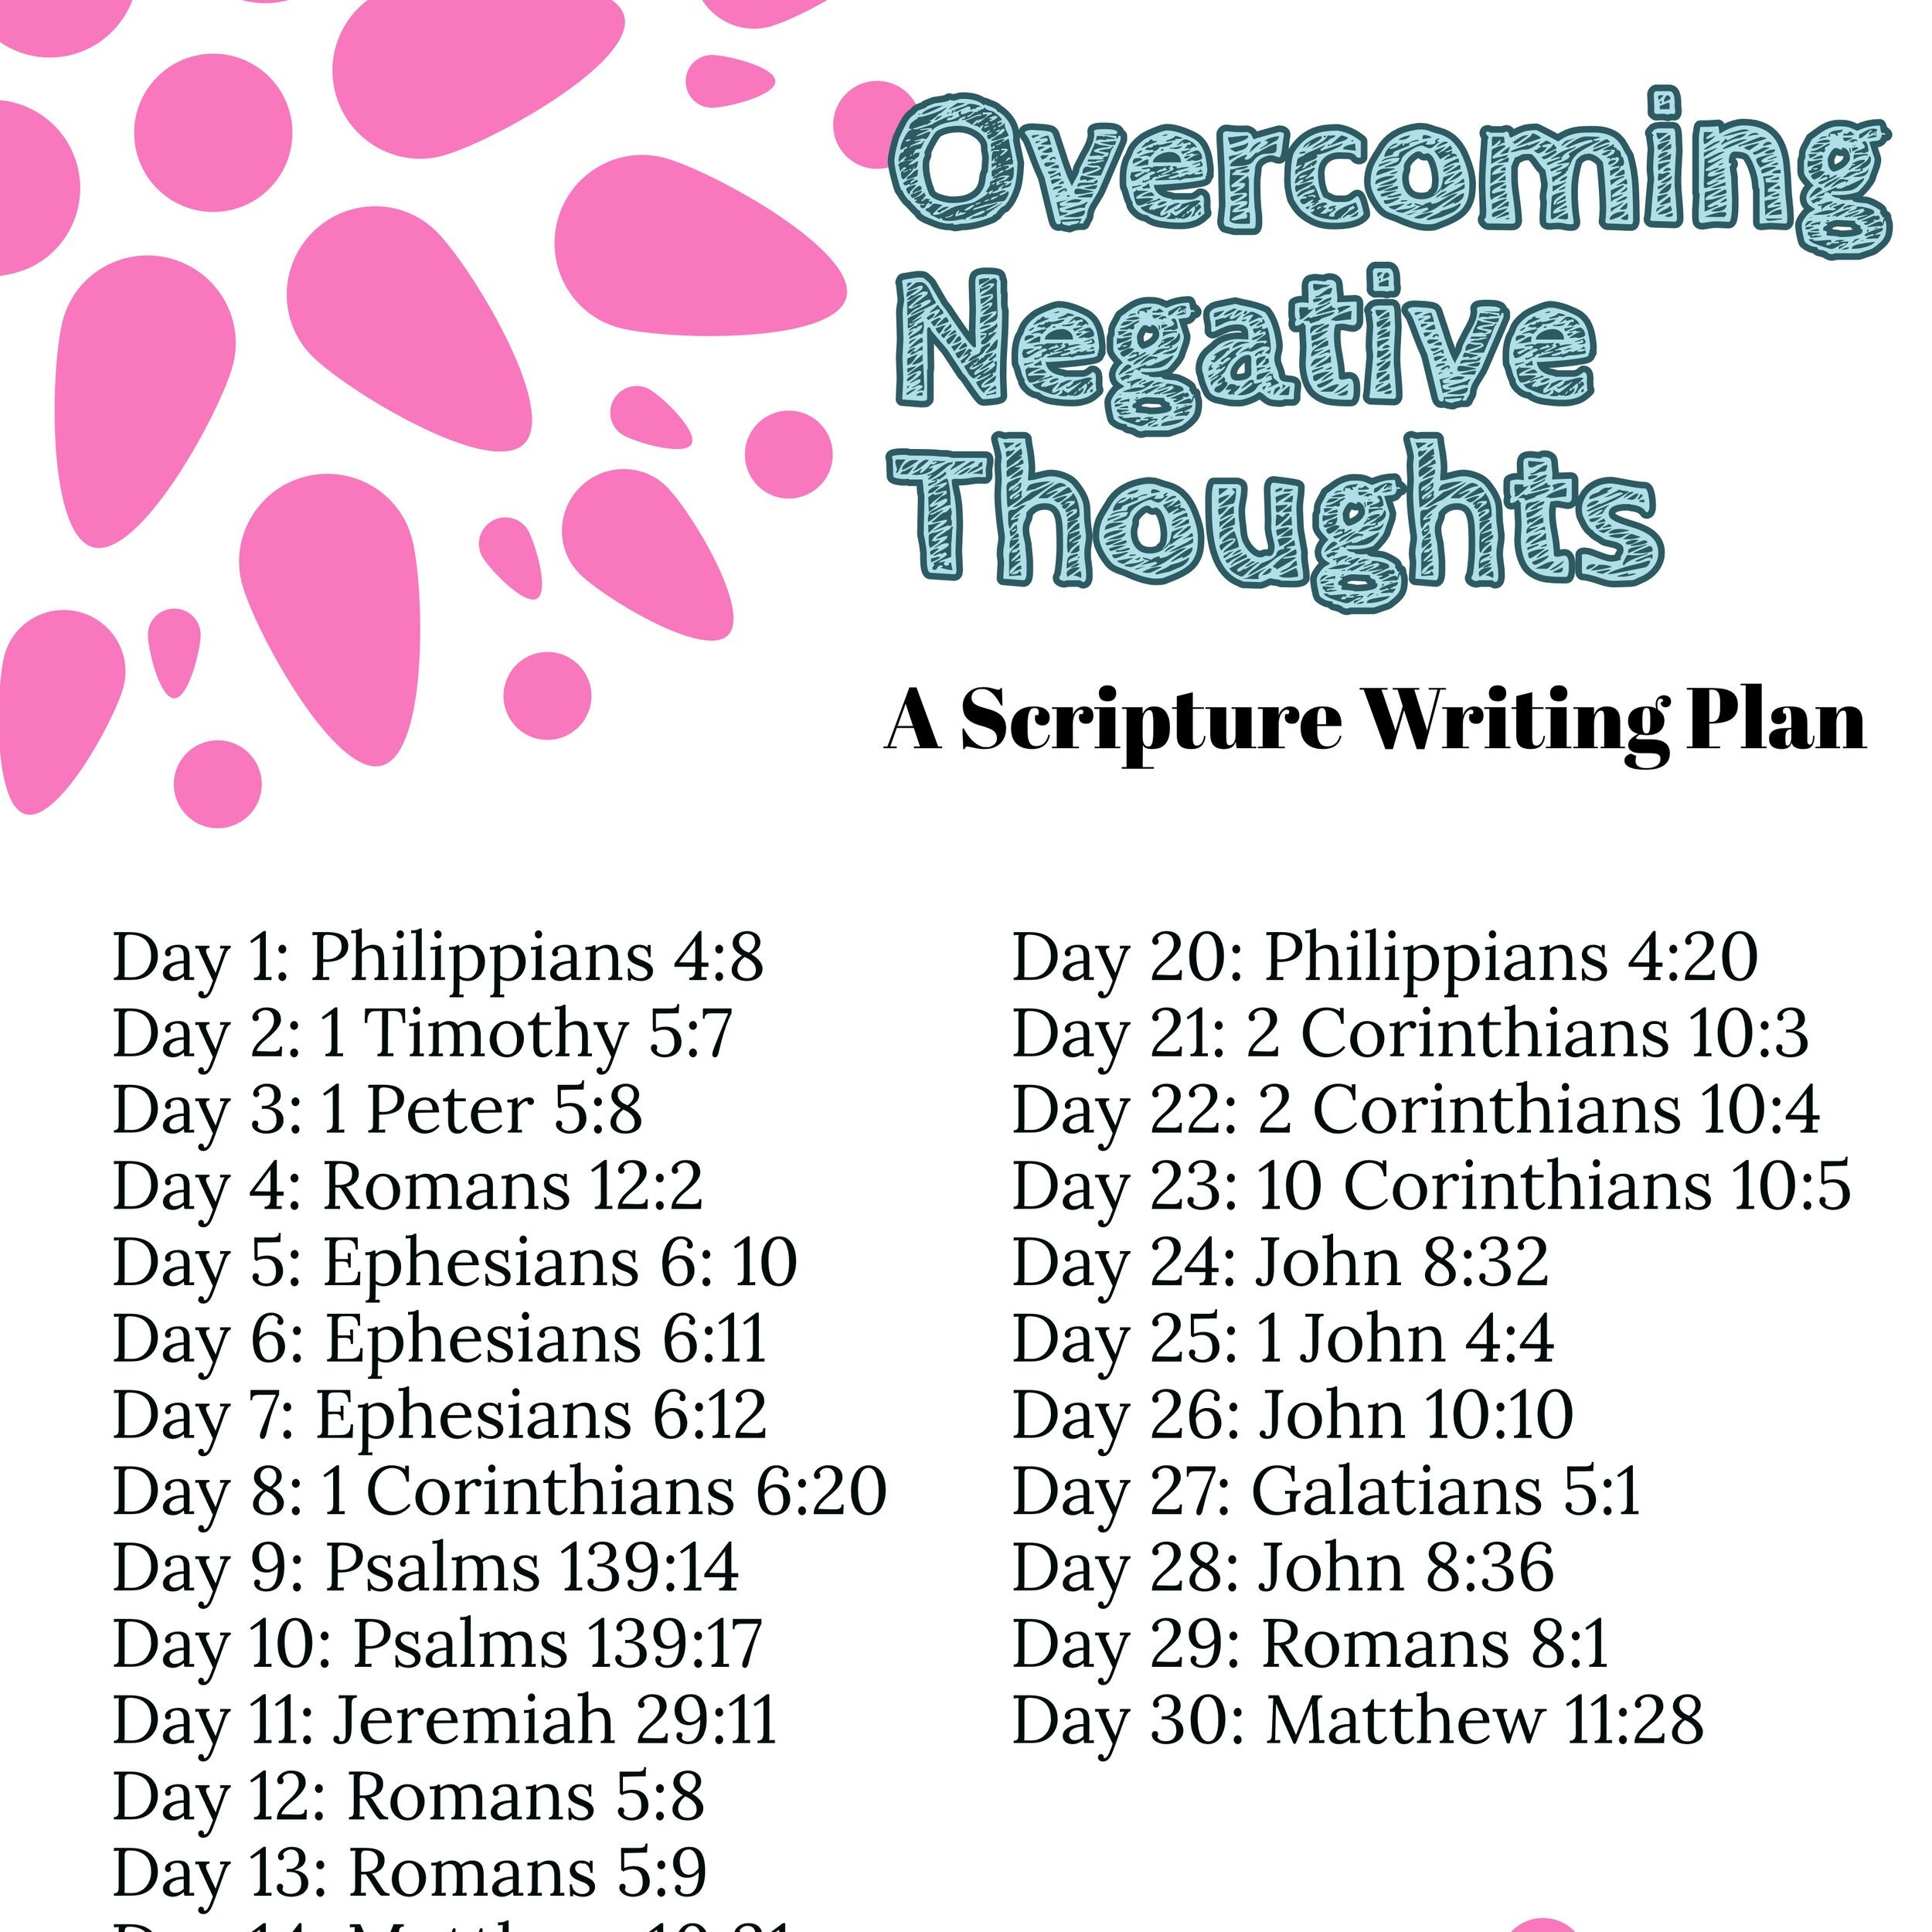 download this scripture writing plan for free. There are 30 verses for negative thoughts.